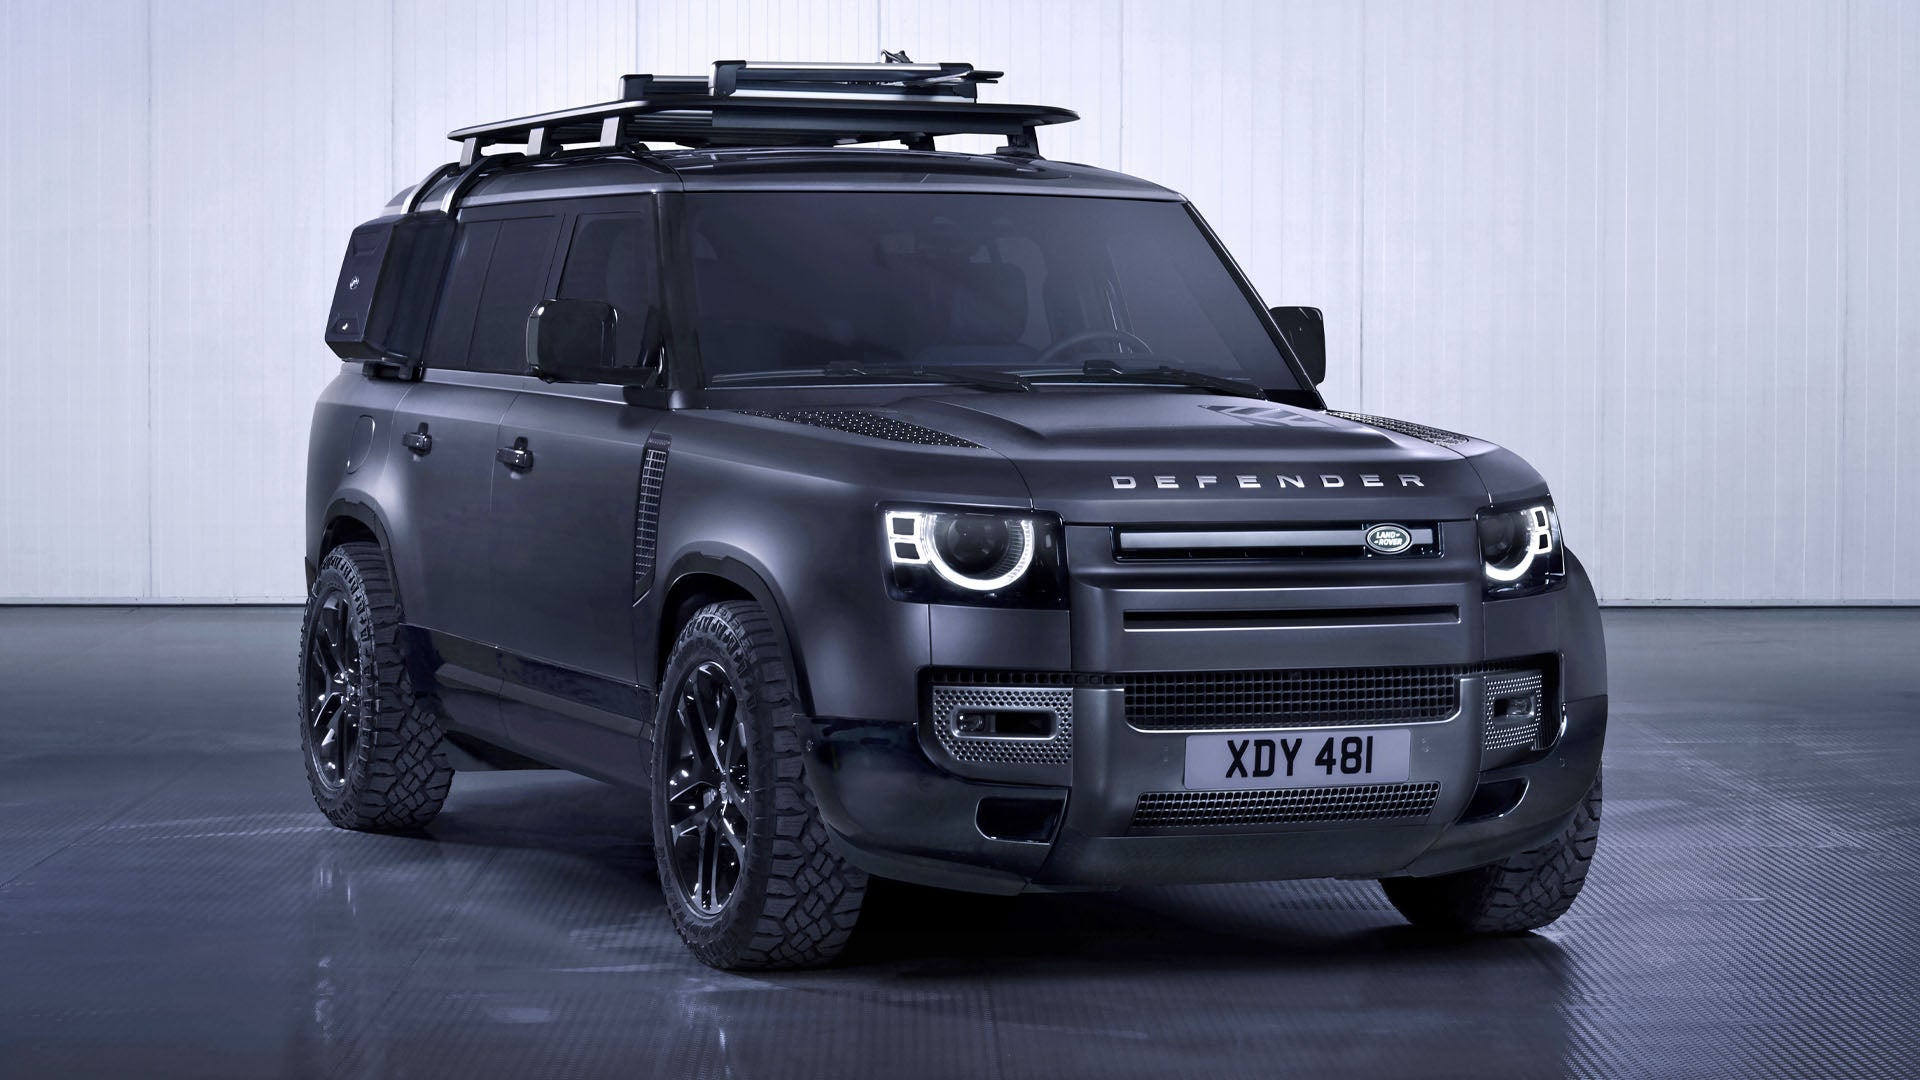 Changes to the 2023 Land Rover Models